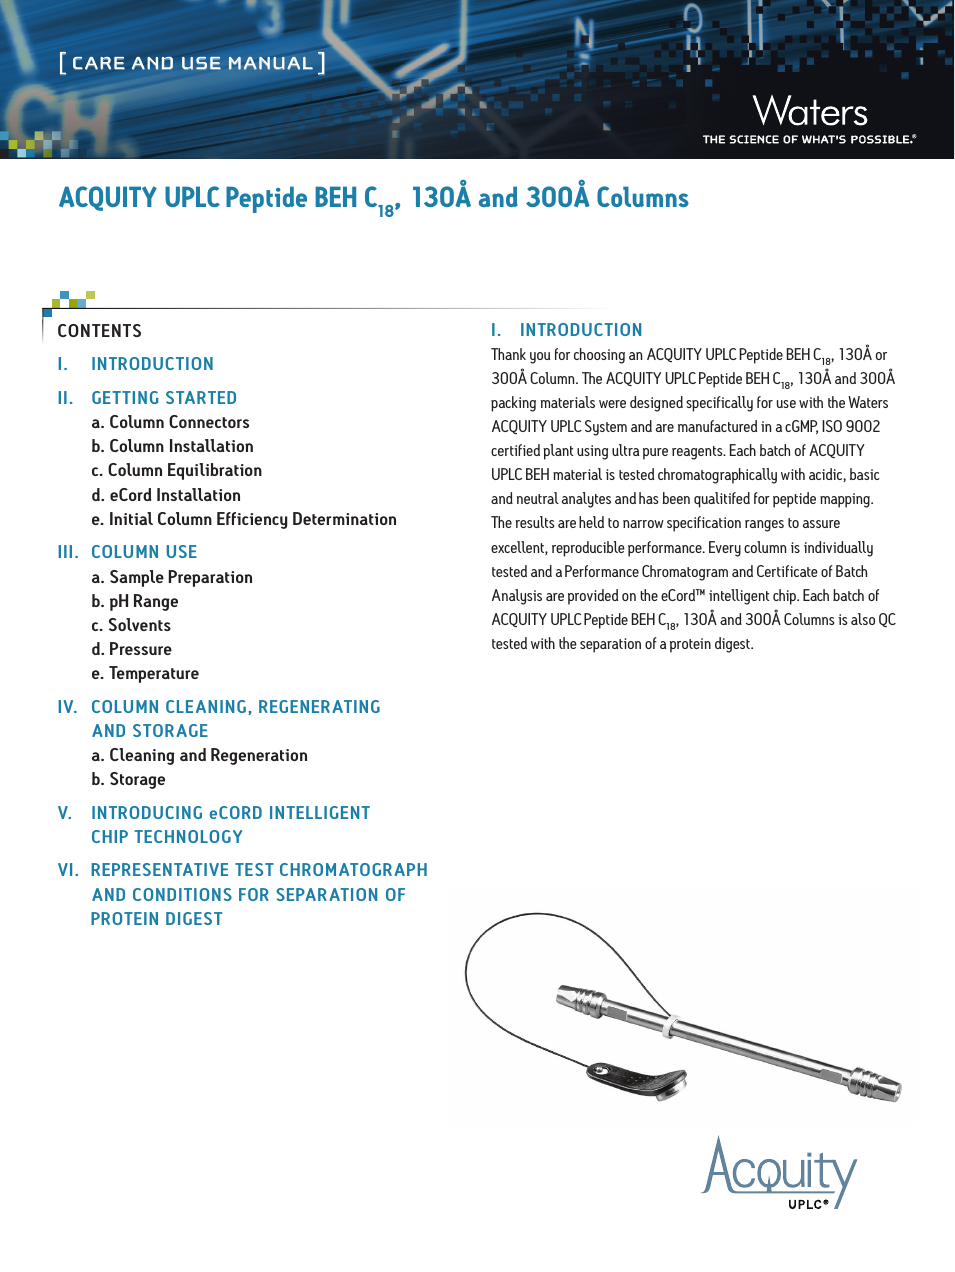 ACQUITY UPLC BEH130 and BEH 300 Columns